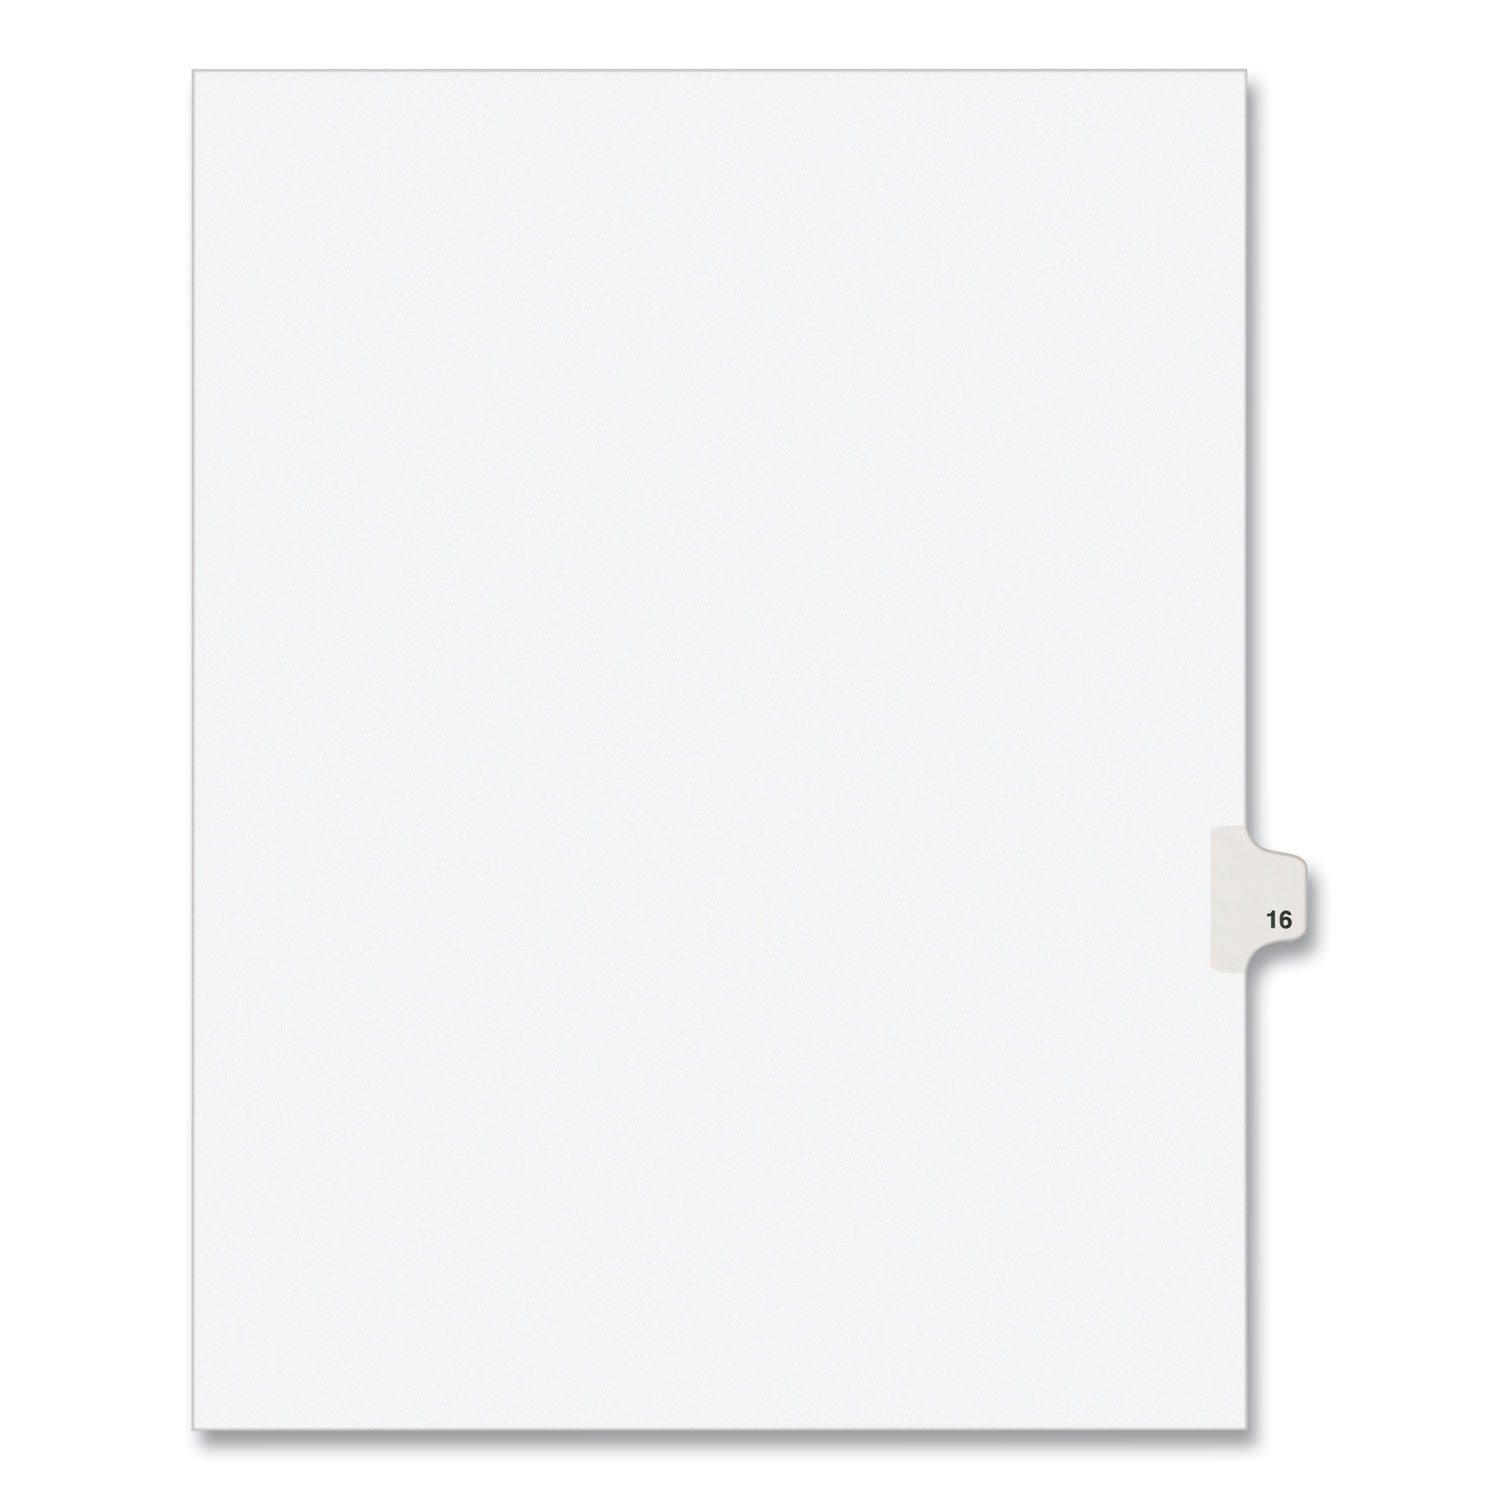 Preprinted Legal Exhibit Side Tab Index Dividers, Avery Style, 10-Tab, 16, 11 x 8.5, White, 25/Pack, (1016) - 